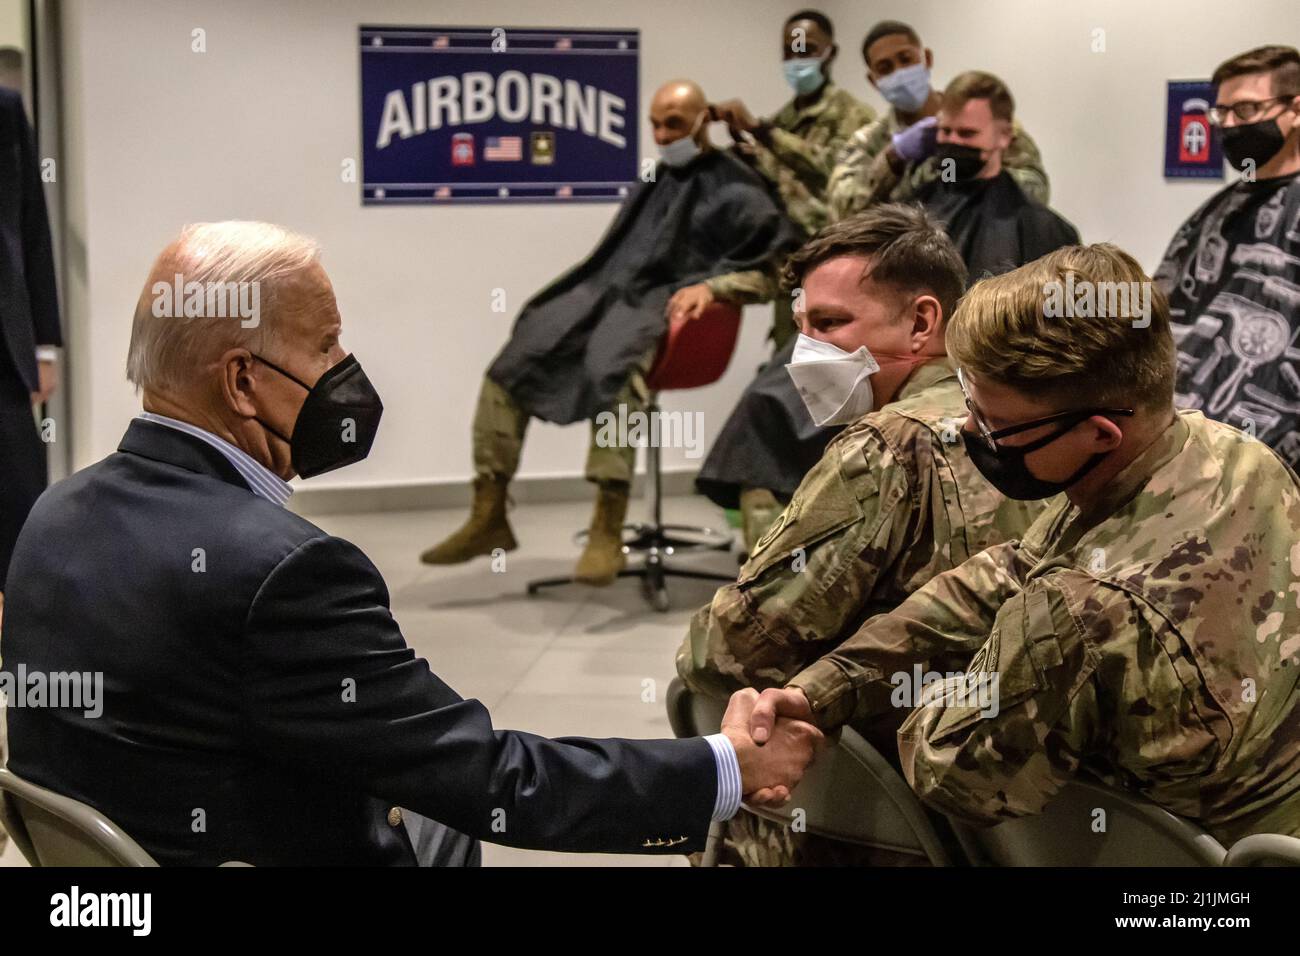 Jasionka, Poland. 25th Mar, 2022. U.S President Joe Biden, greets paratroopers with the 82nd Airborne Division deployed with NATO near the Ukraine border, March 25, 2022 in Jasionka, Poland. Credit: Sgt. Gerald Holman/U.S. Army/Alamy Live News Stock Photo